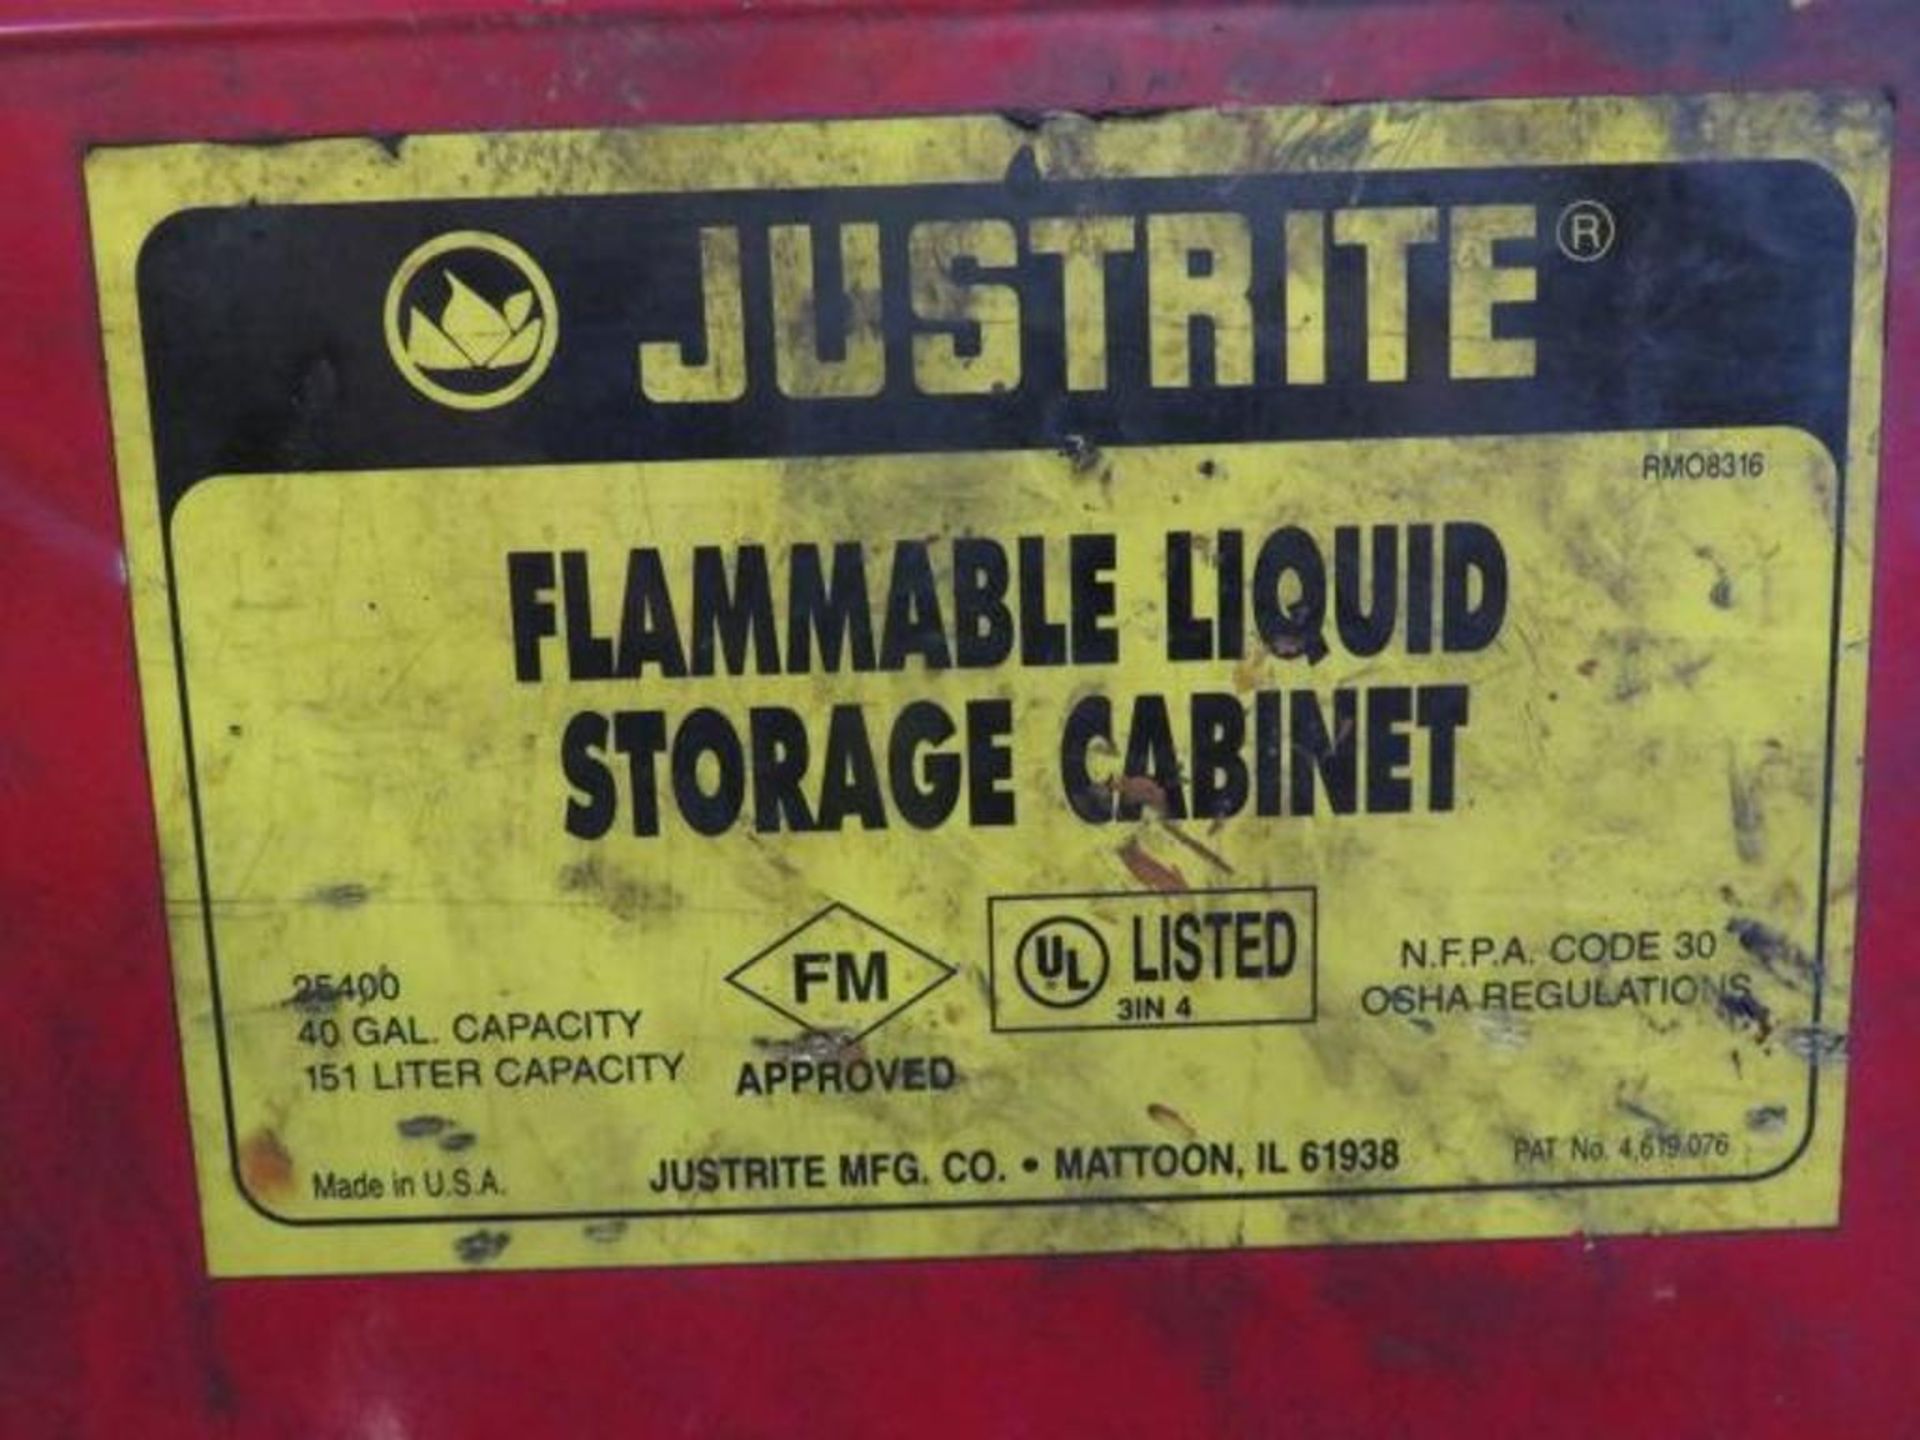 Eagle 45 Gallon Safety/Flammable Storage Cabinet Model 1947 - Image 2 of 2